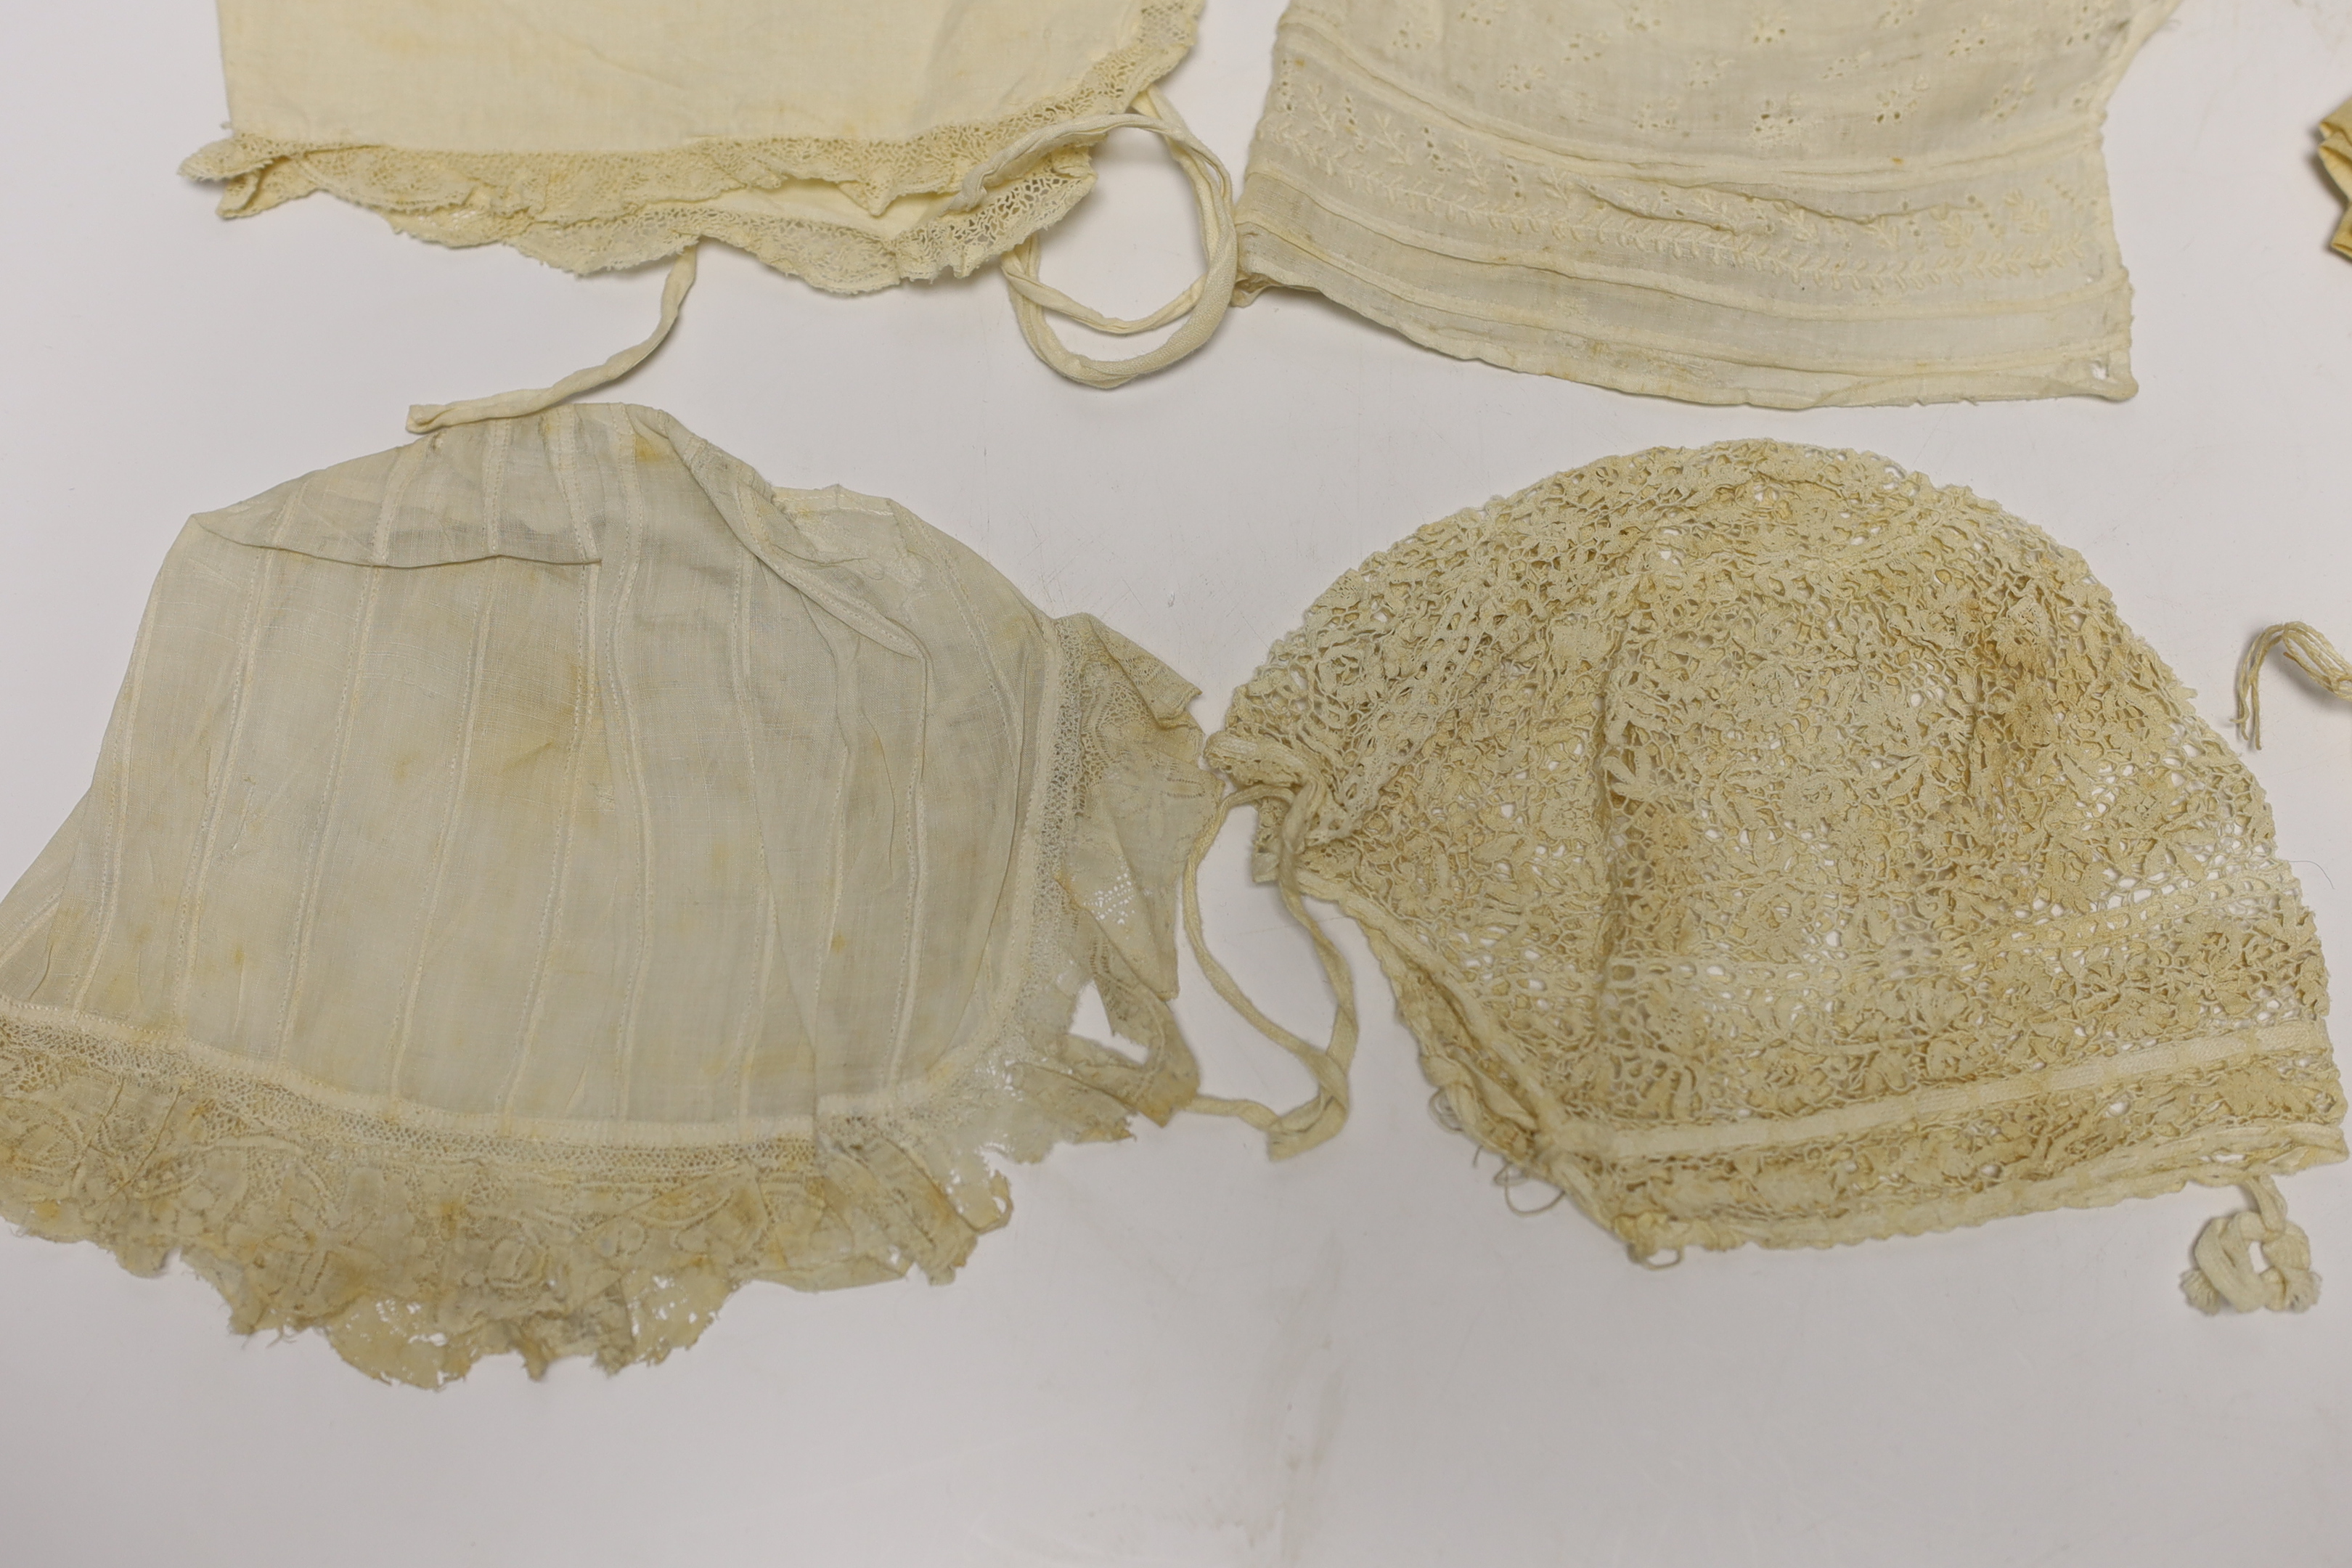 Seven baby bonnets, late 18th / 19th century, including a fine bobbin lace bonnet and unusual silk knitted and multi coloured floral designed beaded bonnet